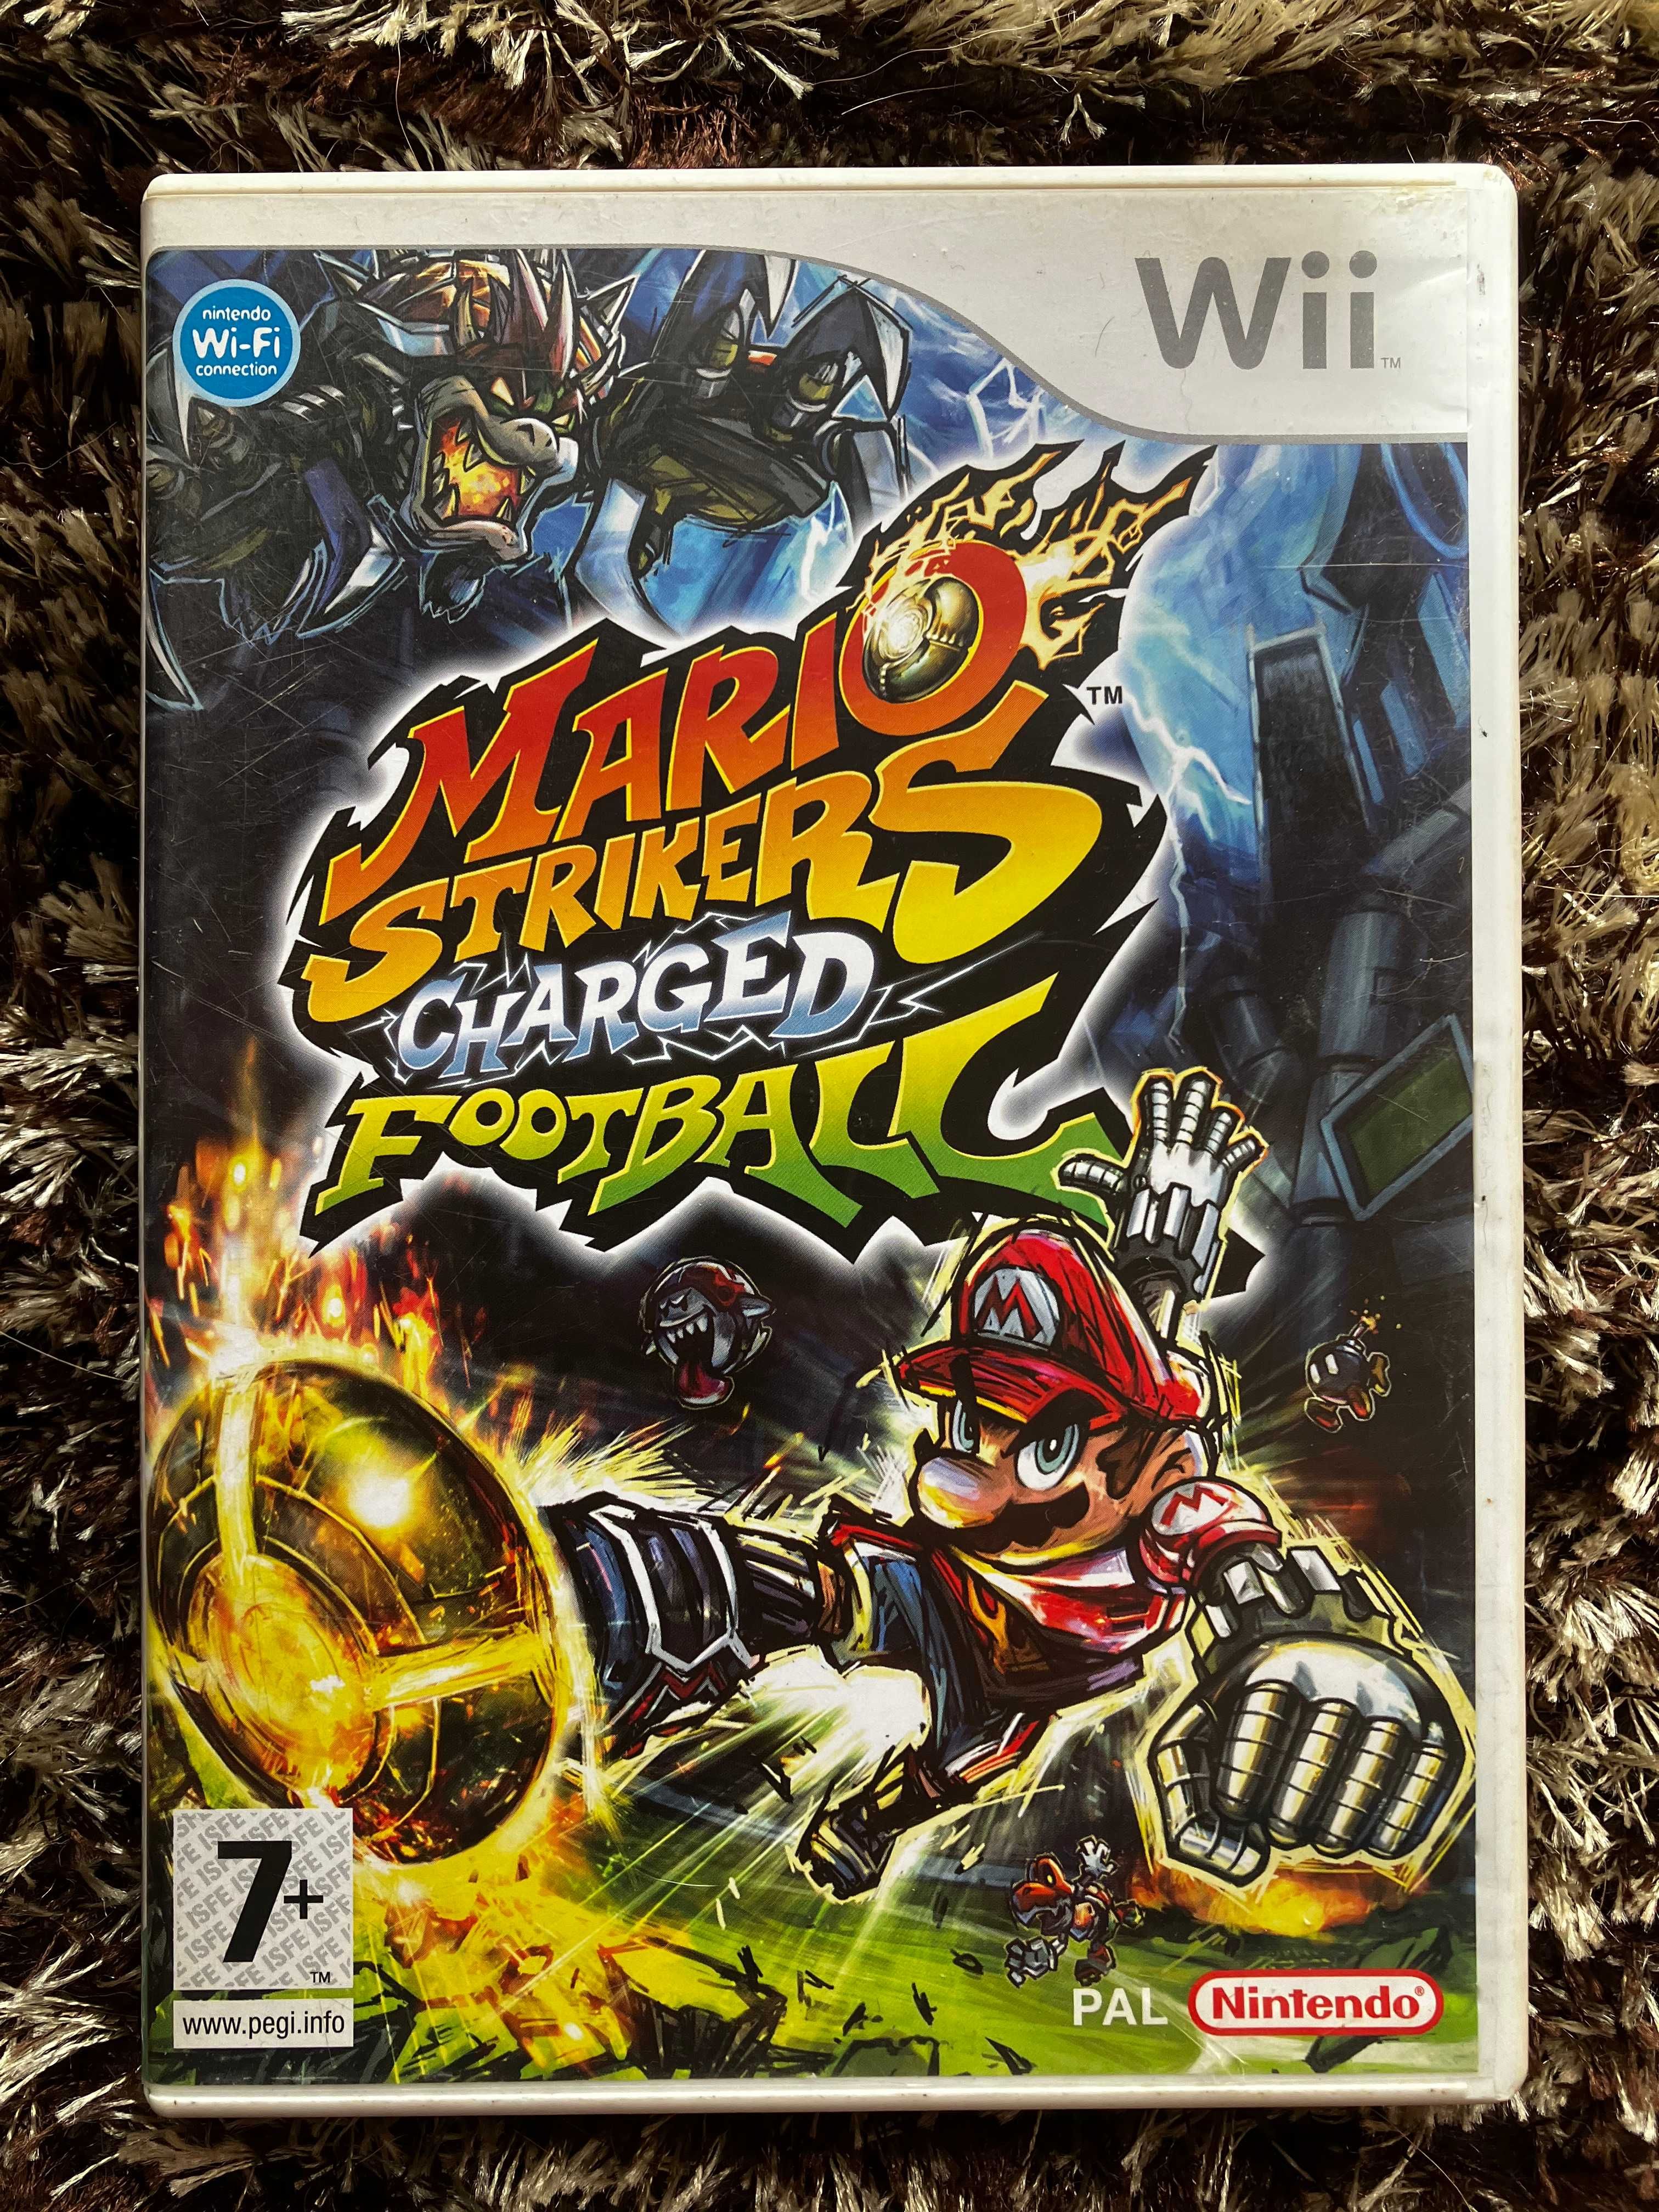 Mario Strikers Charged Footblall Wii